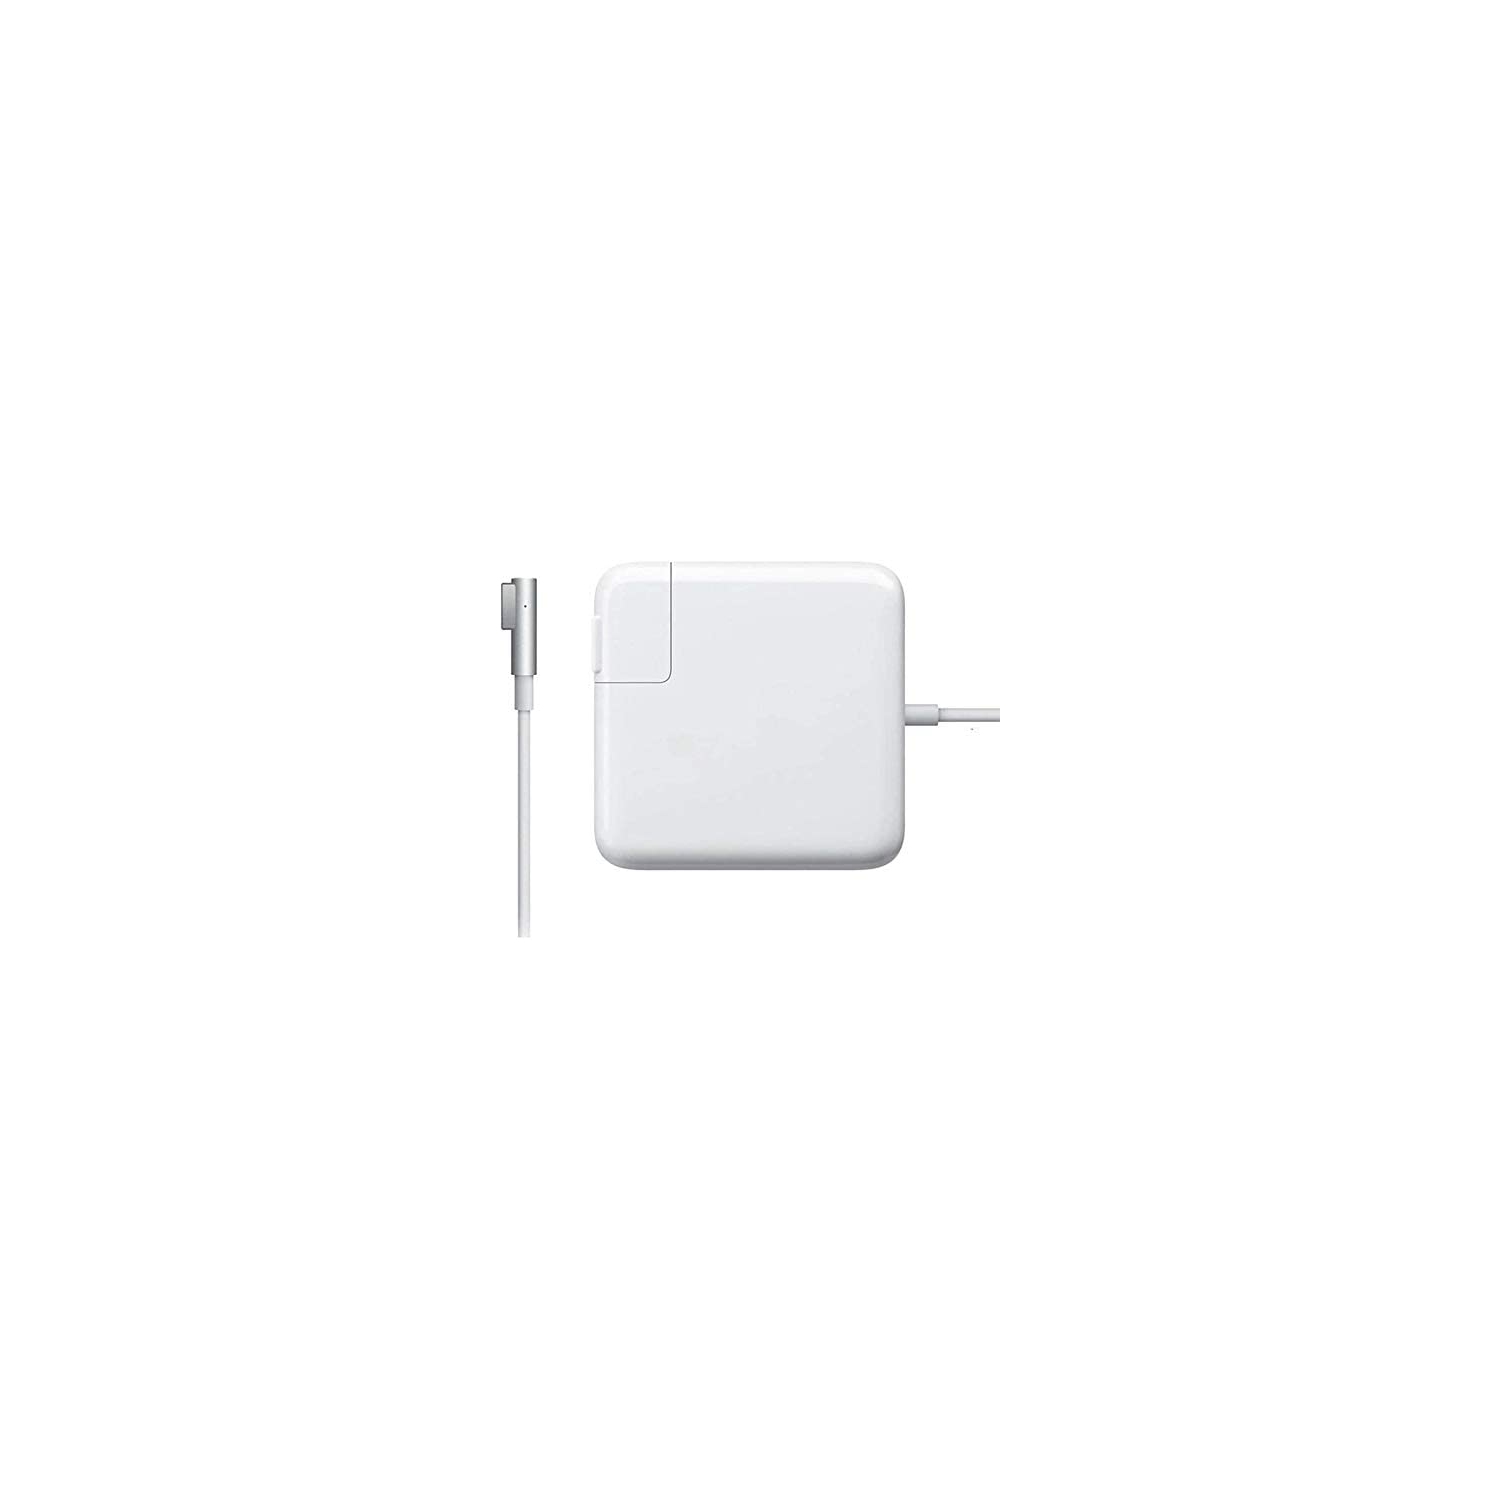 Wingomart MacBook Pro 60W MagSafe Charger with L-Tip Power Adapter for Apple MagSafe MacBook (A1278, A1344, A1181, A1184)